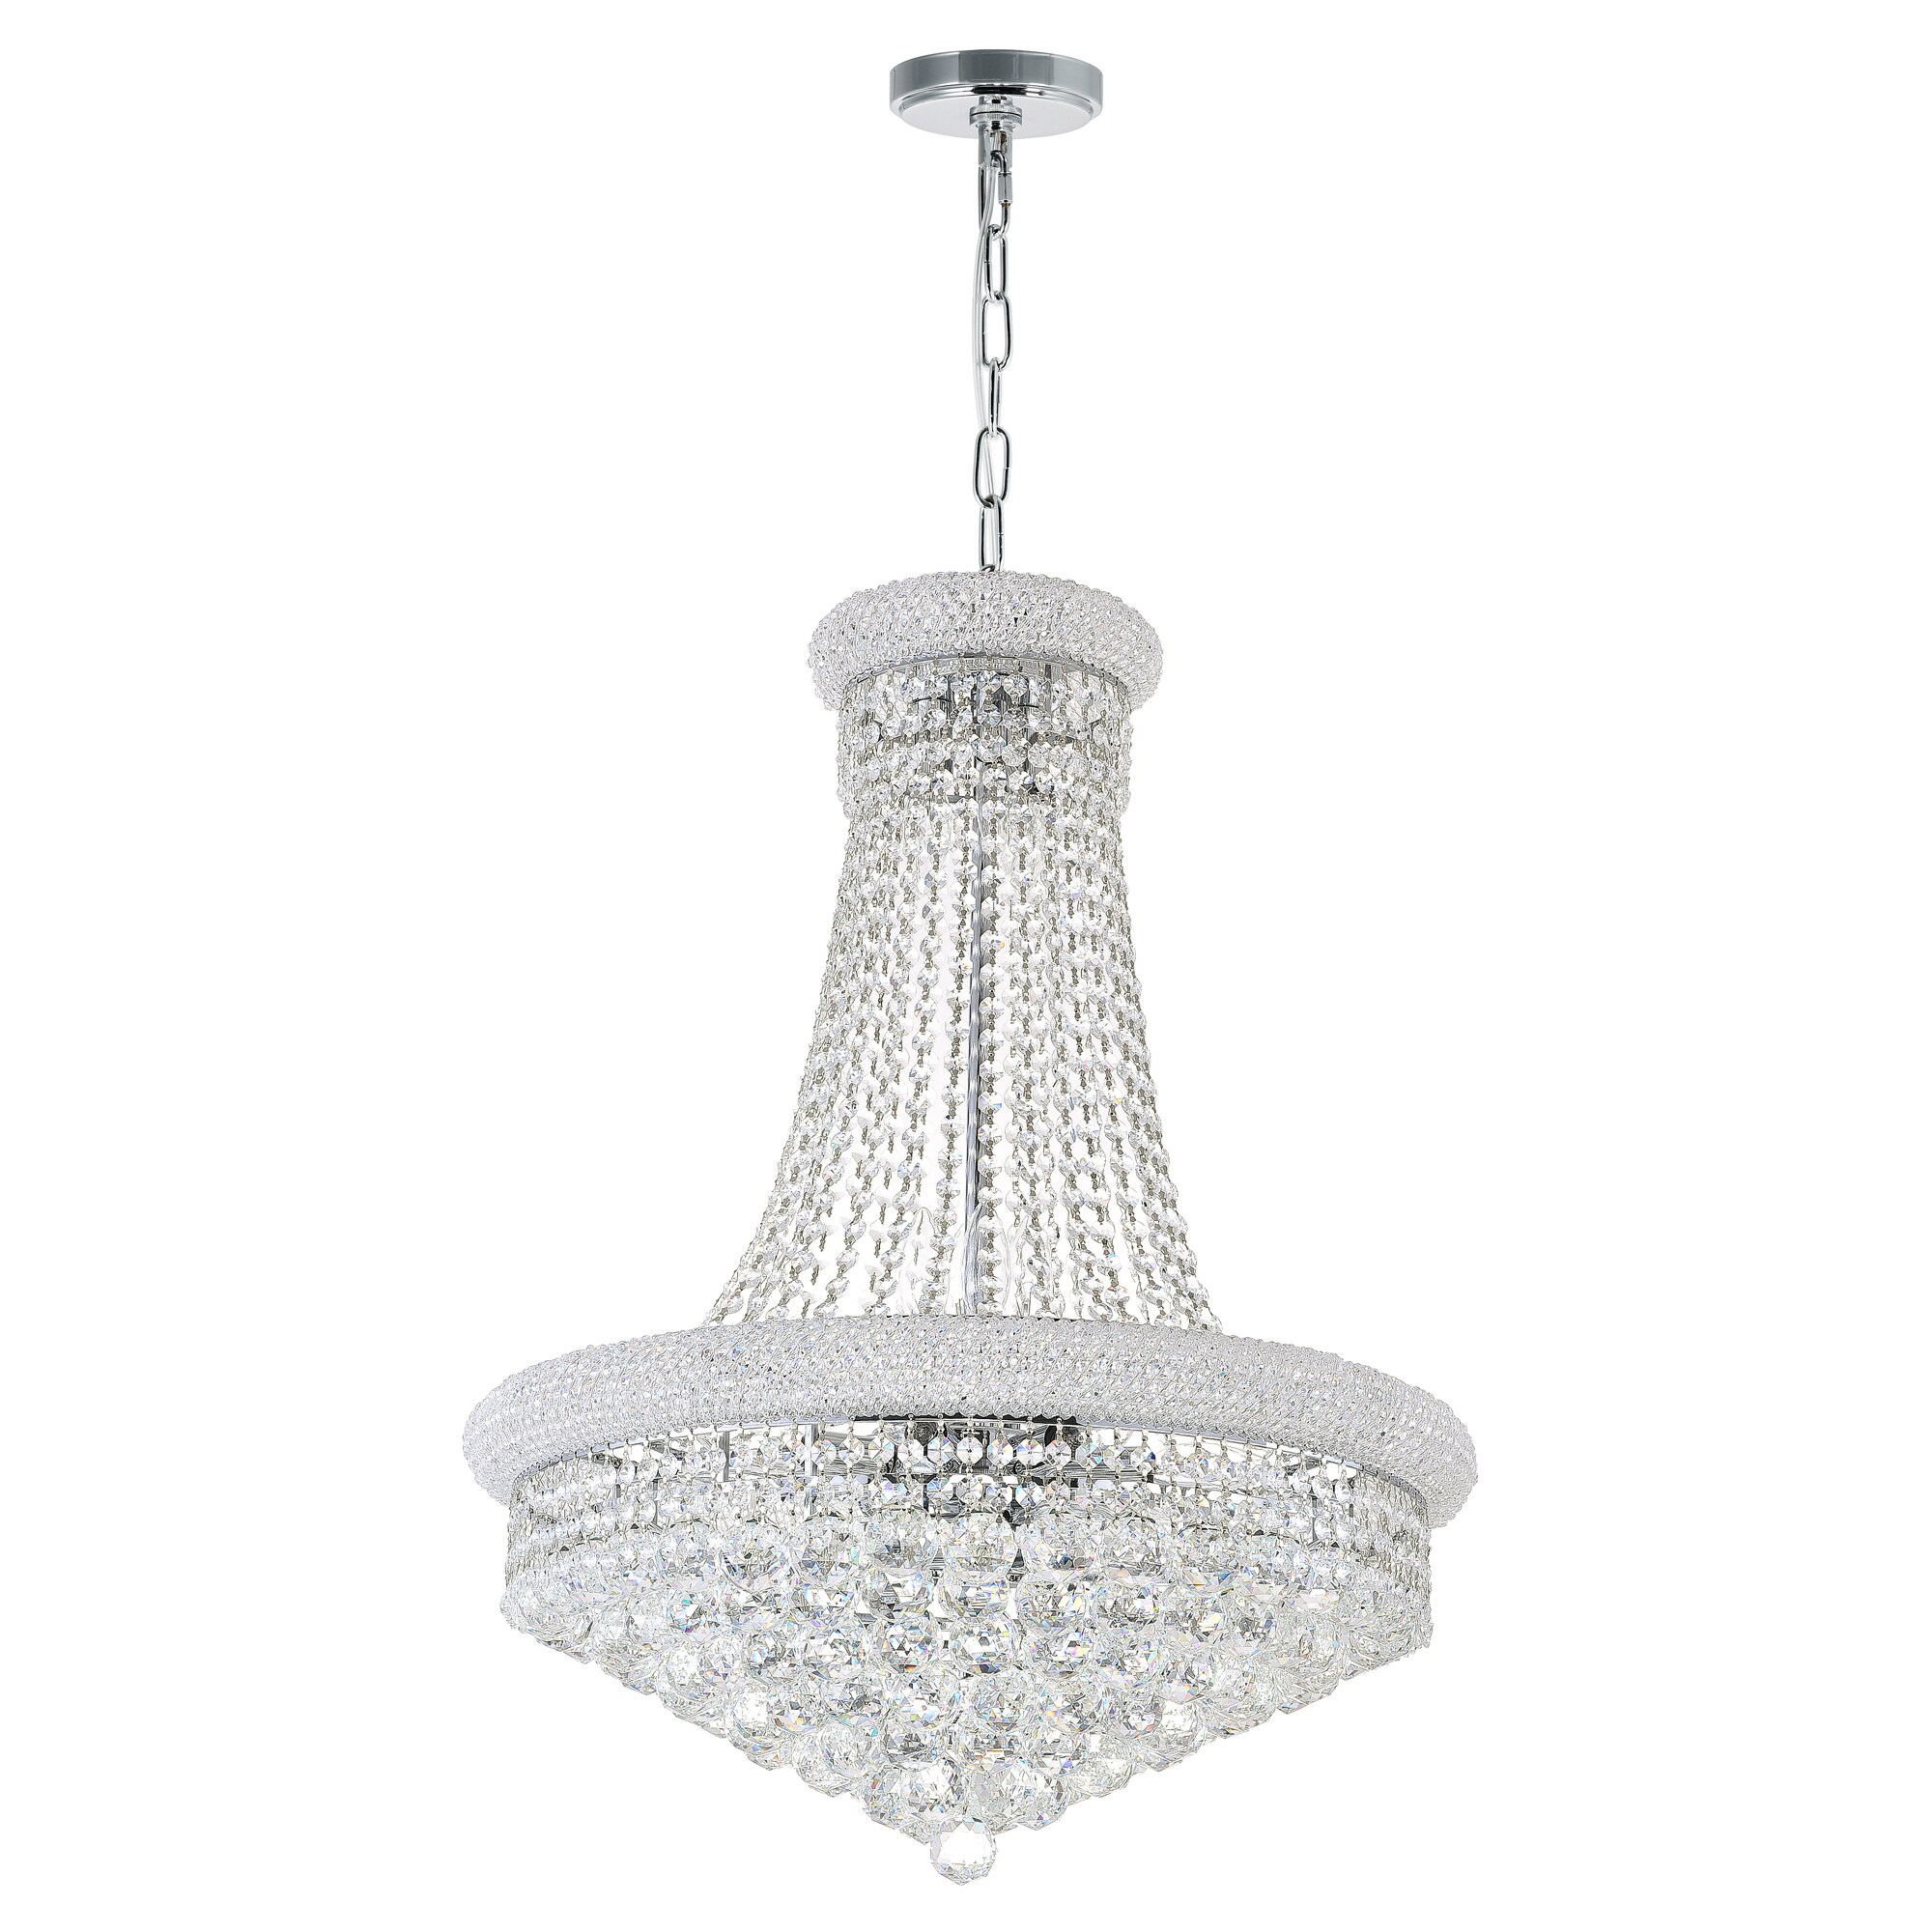 CWI Lighting Empire 17-Light Chrome Traditional Damp Rated Chandelier ...